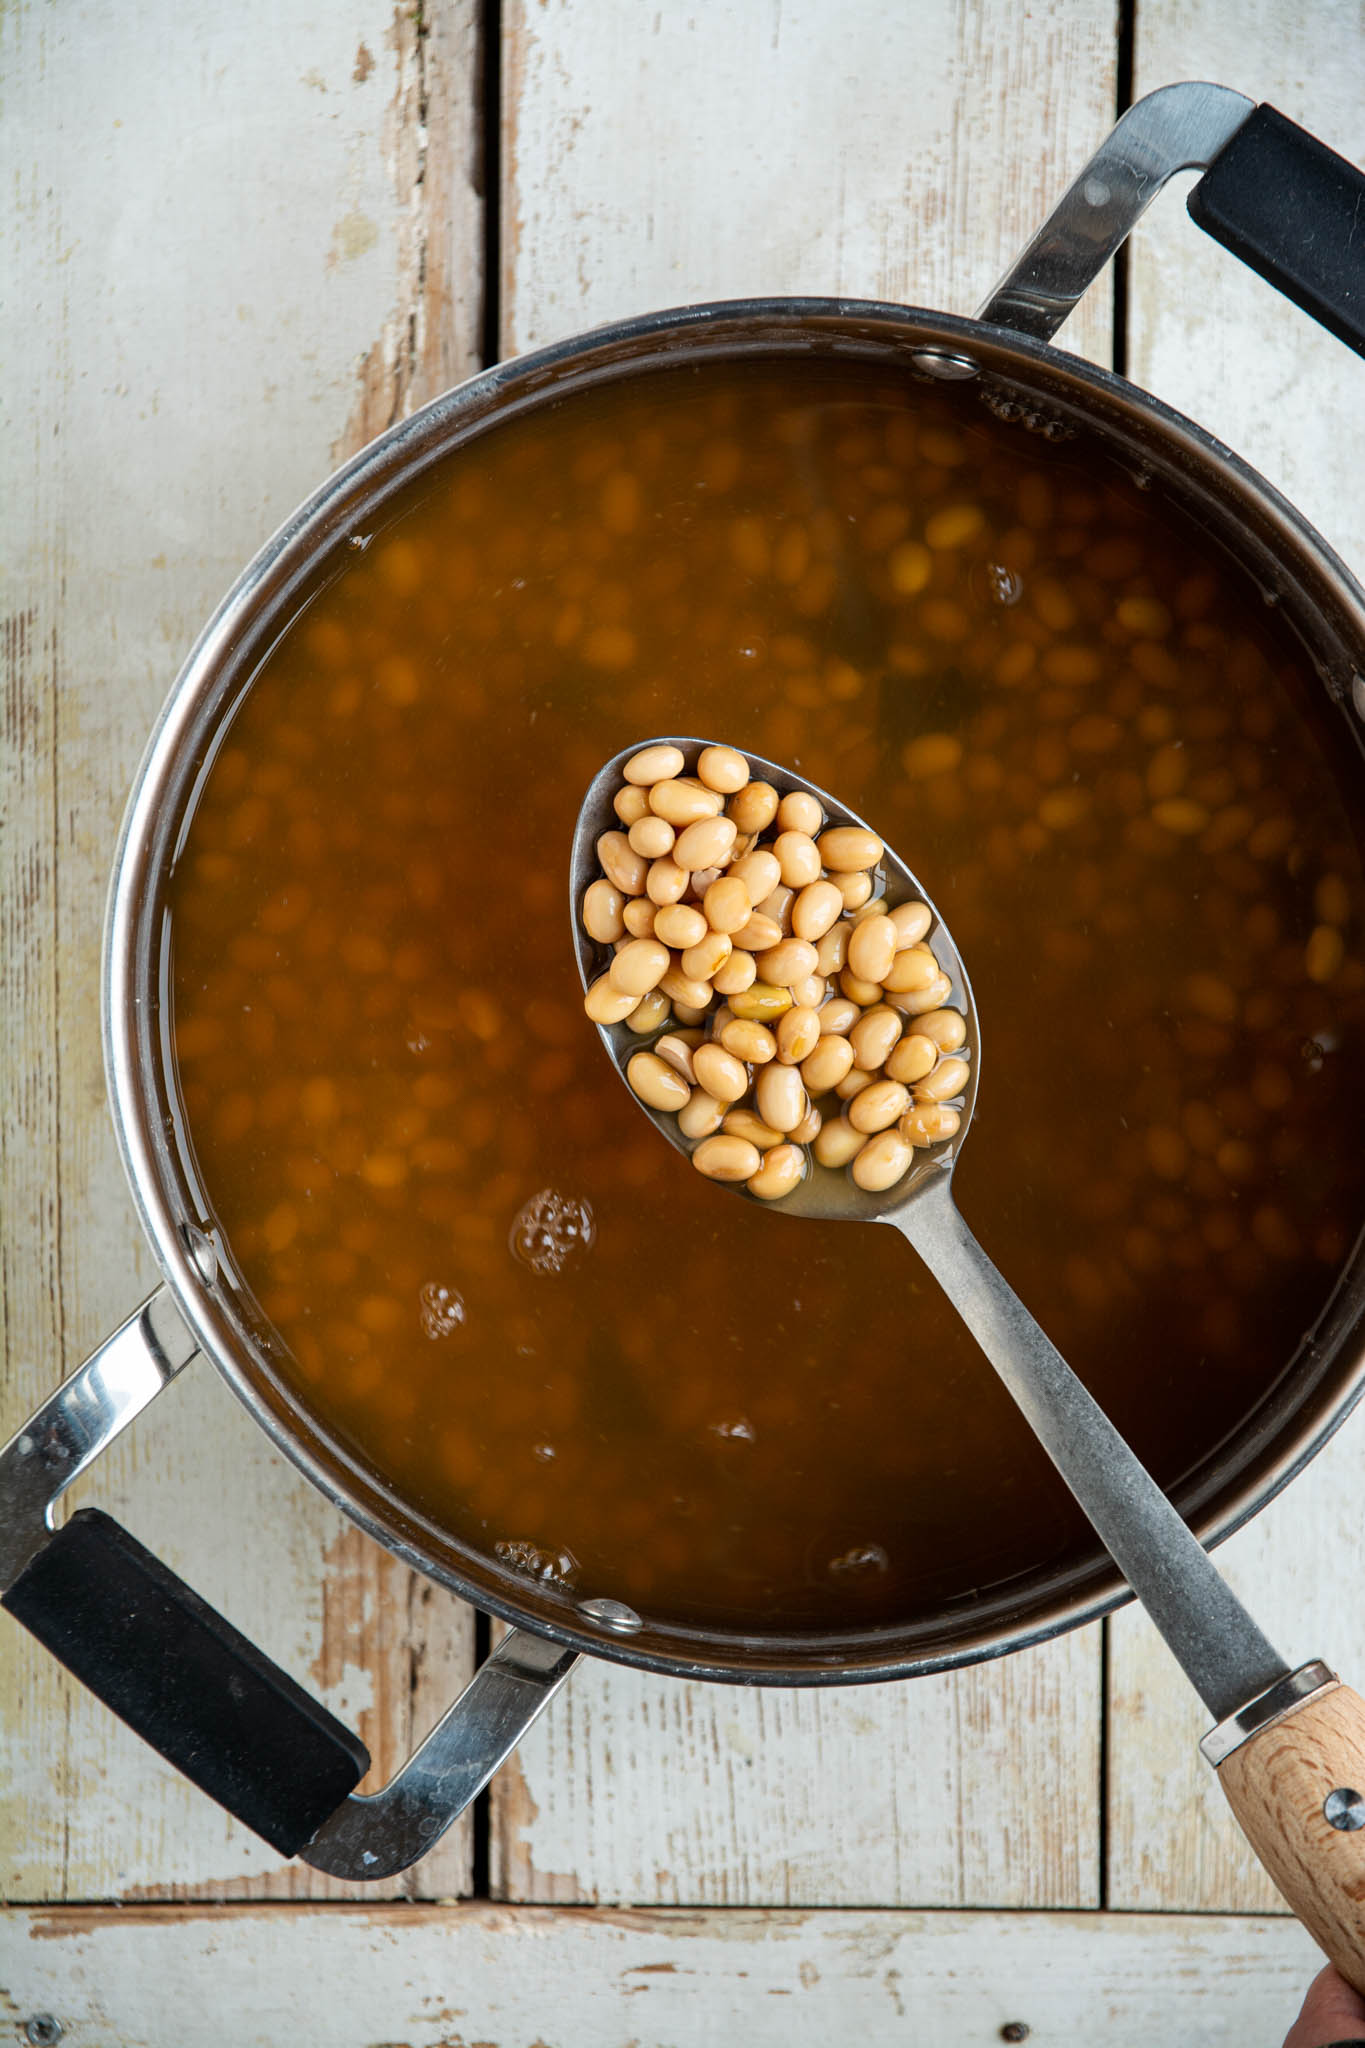 Learn how to cook soybeans at home in a regular pot or a saucepan. Use the cooked soybeans for high protein hummus, in soups, stews, and salads, or nibble on them as they are. 